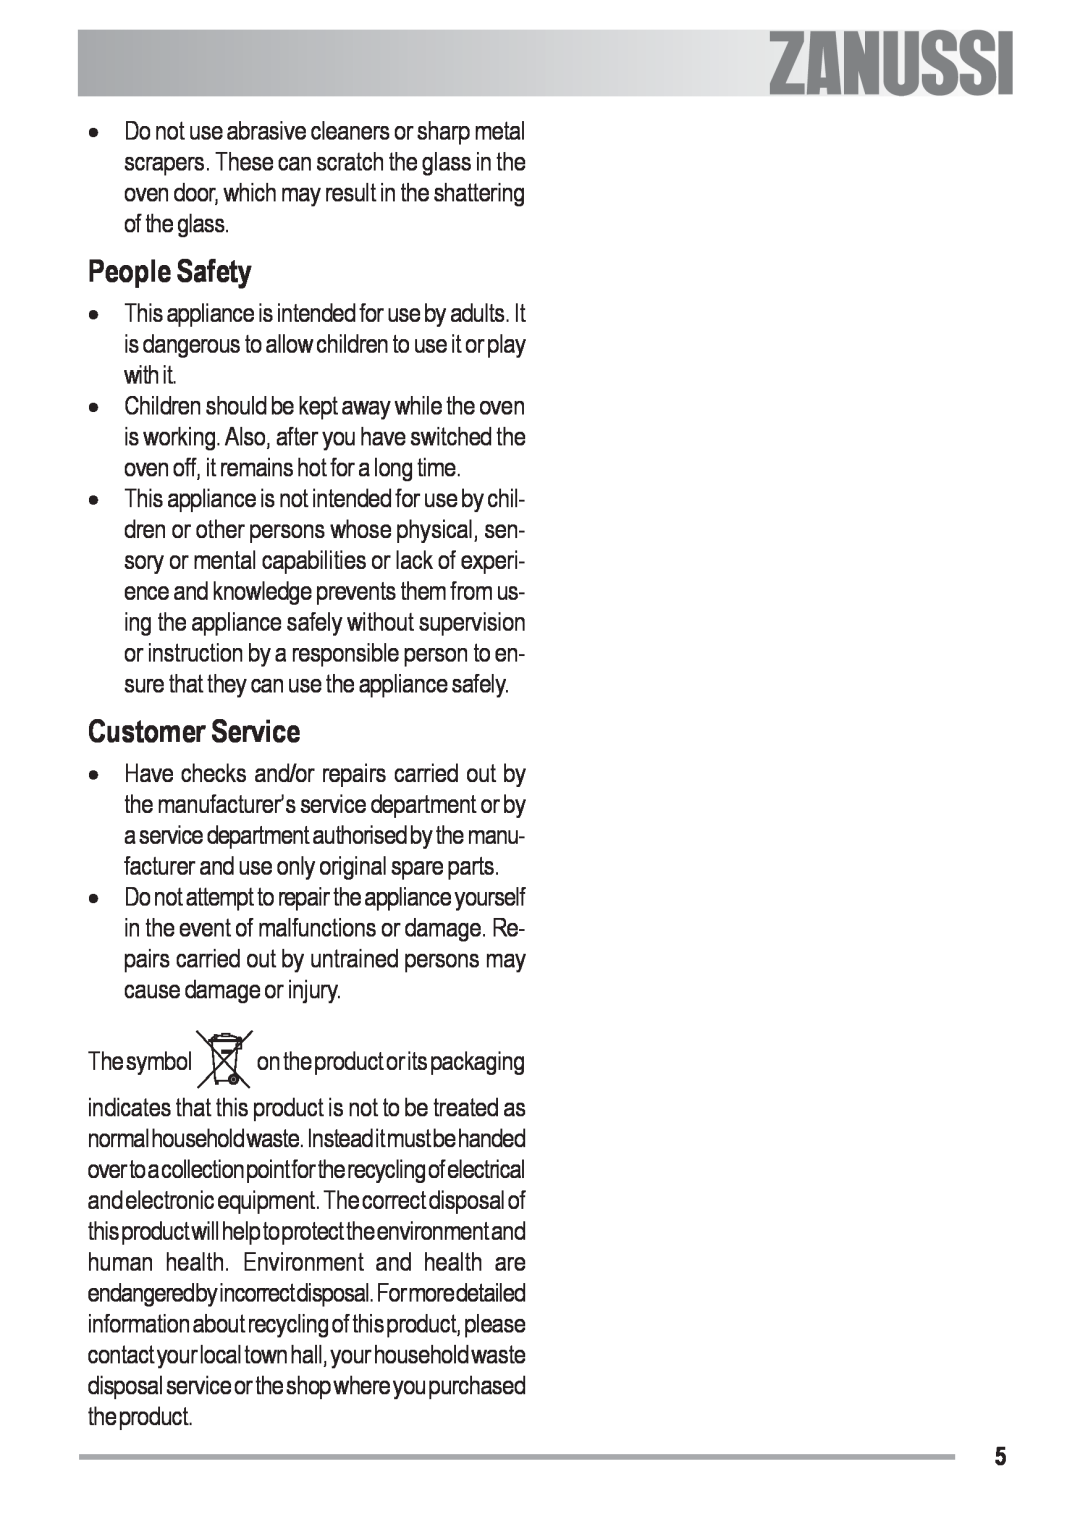 Zanussi ZOB 691 manual People Safety, Customer Service, electrolux, The symbol on the product or its packaging 